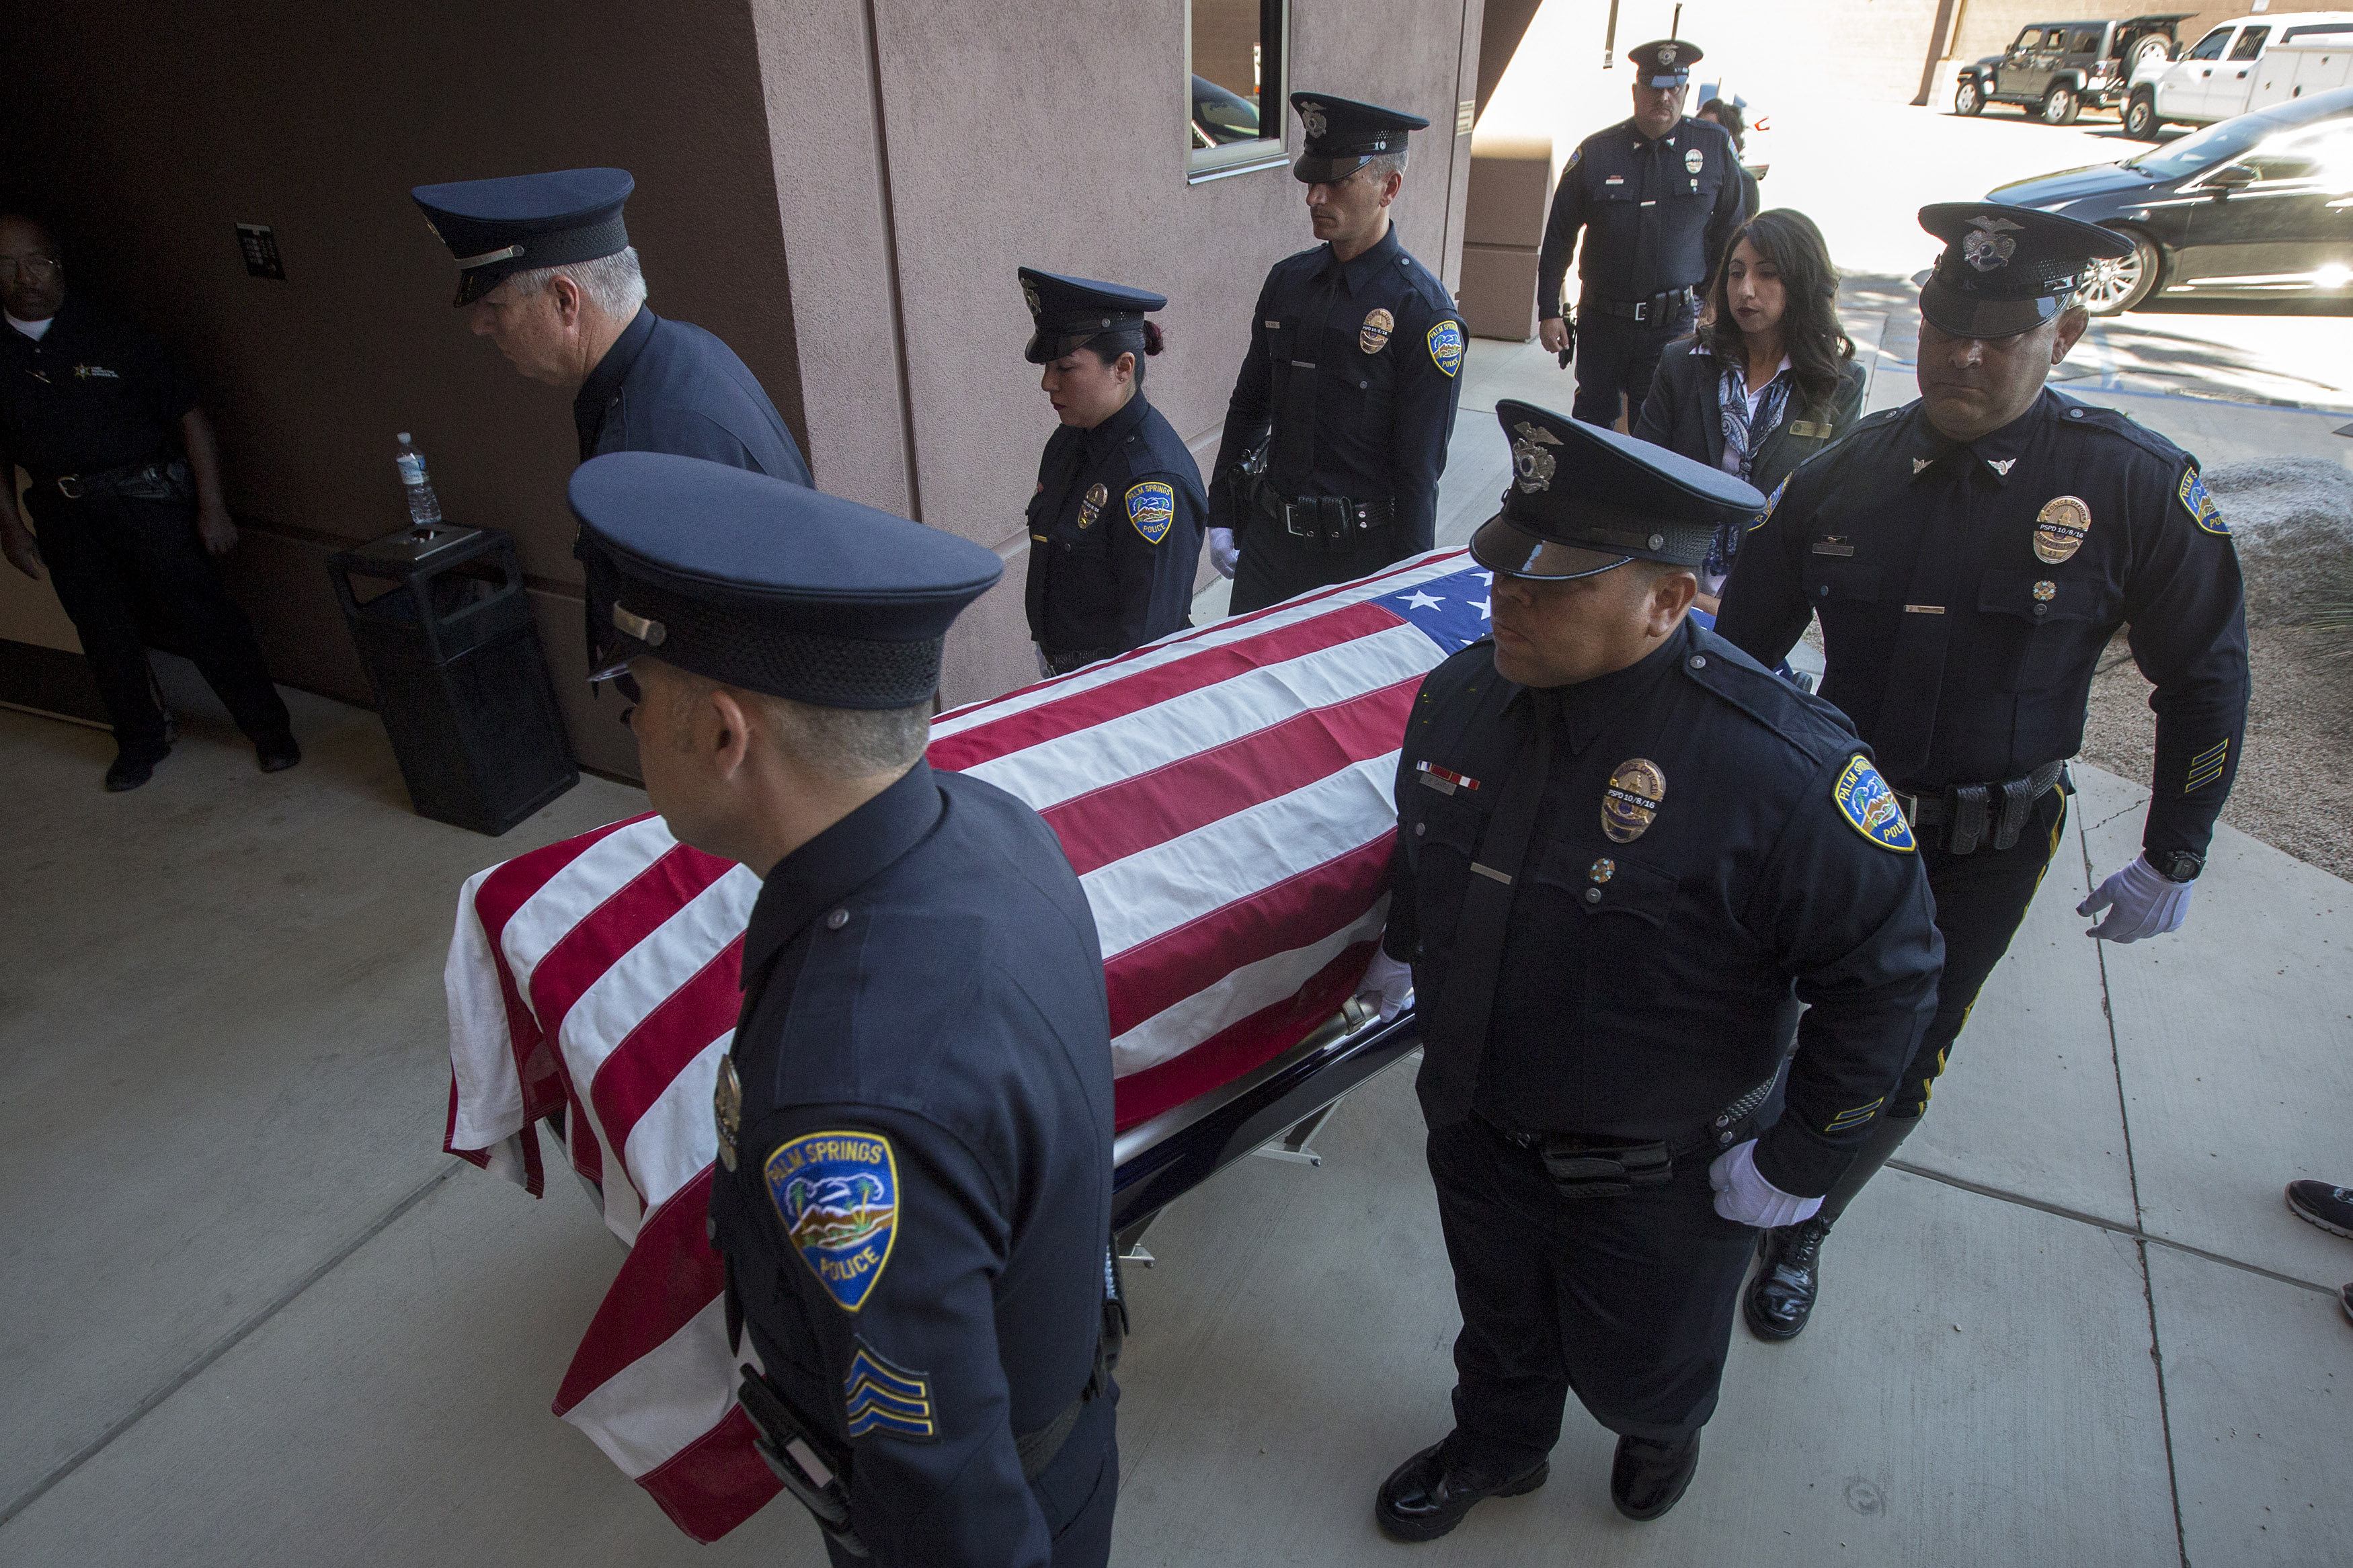 The casket of slain police officer Jose Gilbert Vega is carried by fellow officers at a joint memorial service for fallen Palm Springs Police officers Jose Gilbert Vega and Lesley Zerebny at the Palm Springs Convention Center on October 18, 2016. (Photo by David McNew/Getty Images)